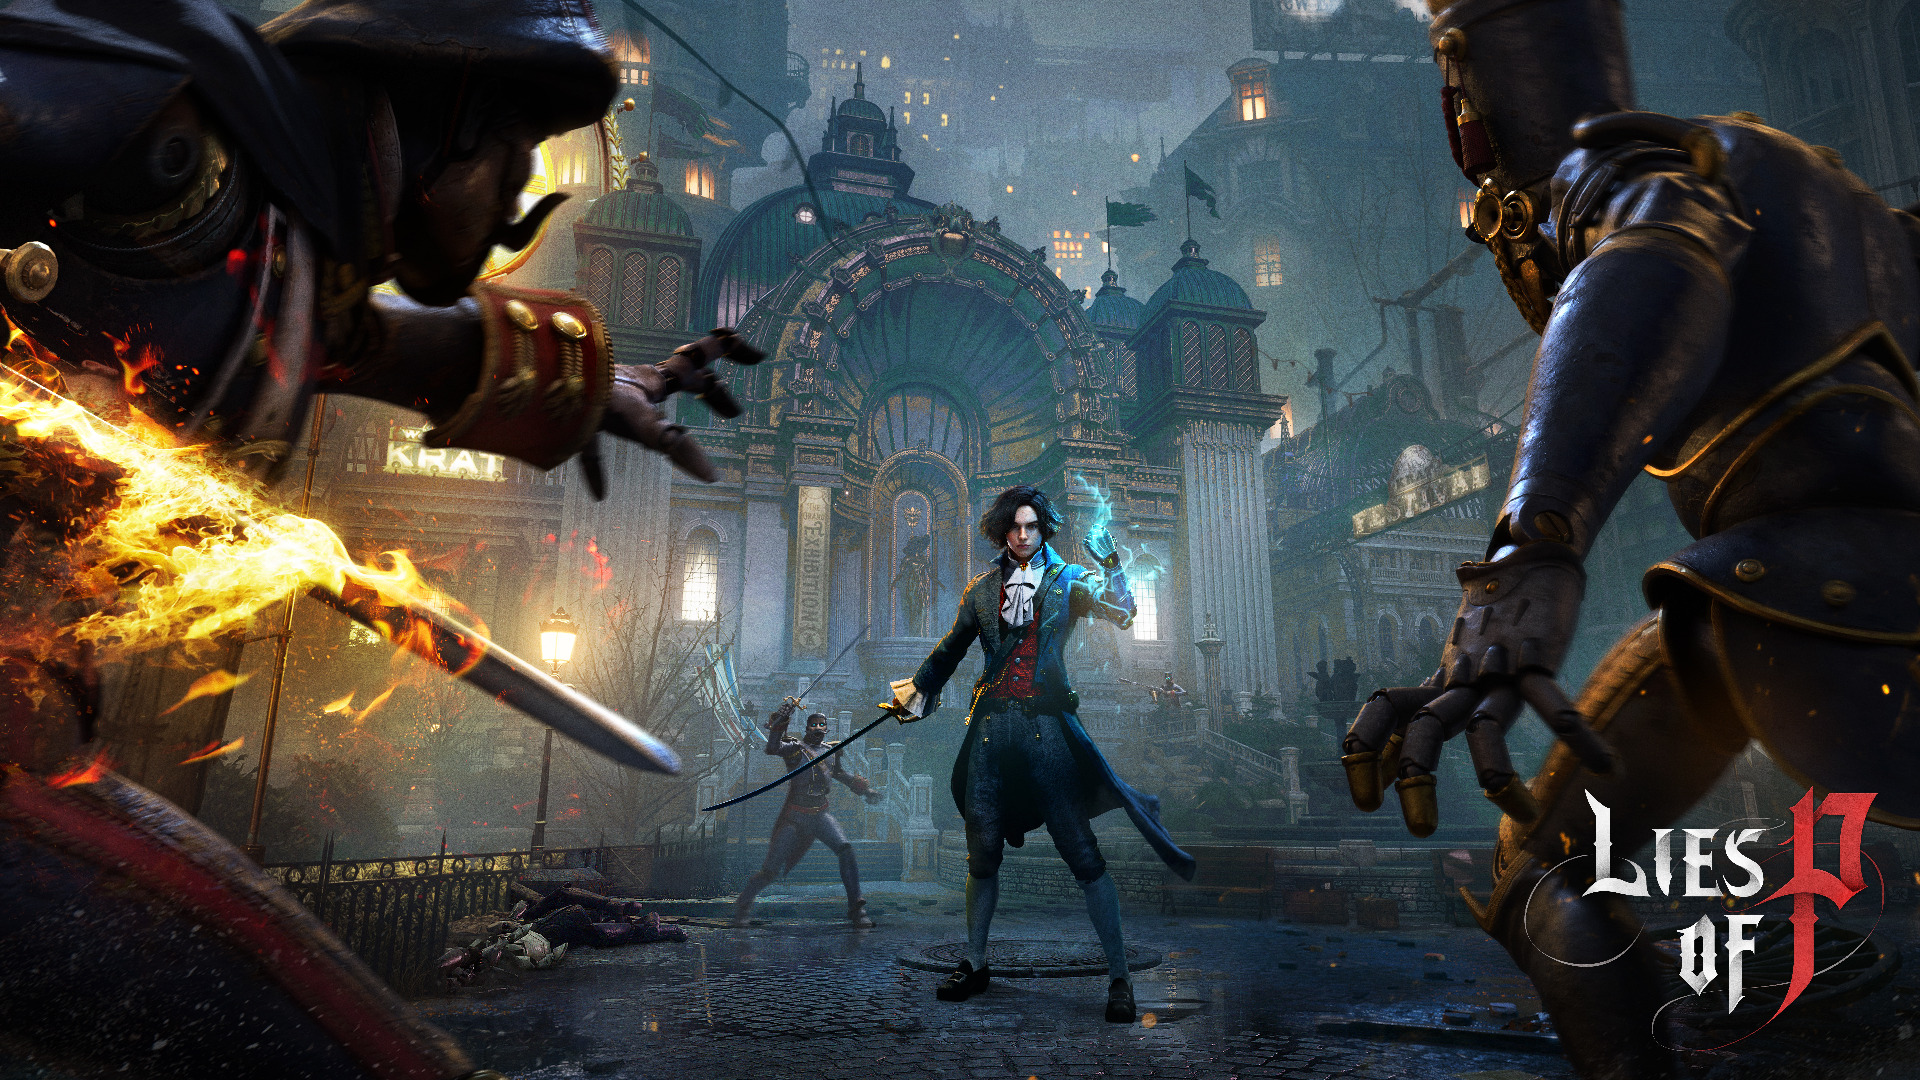 Preview: Lies of P can't deny how much it wants to be Bloodborne